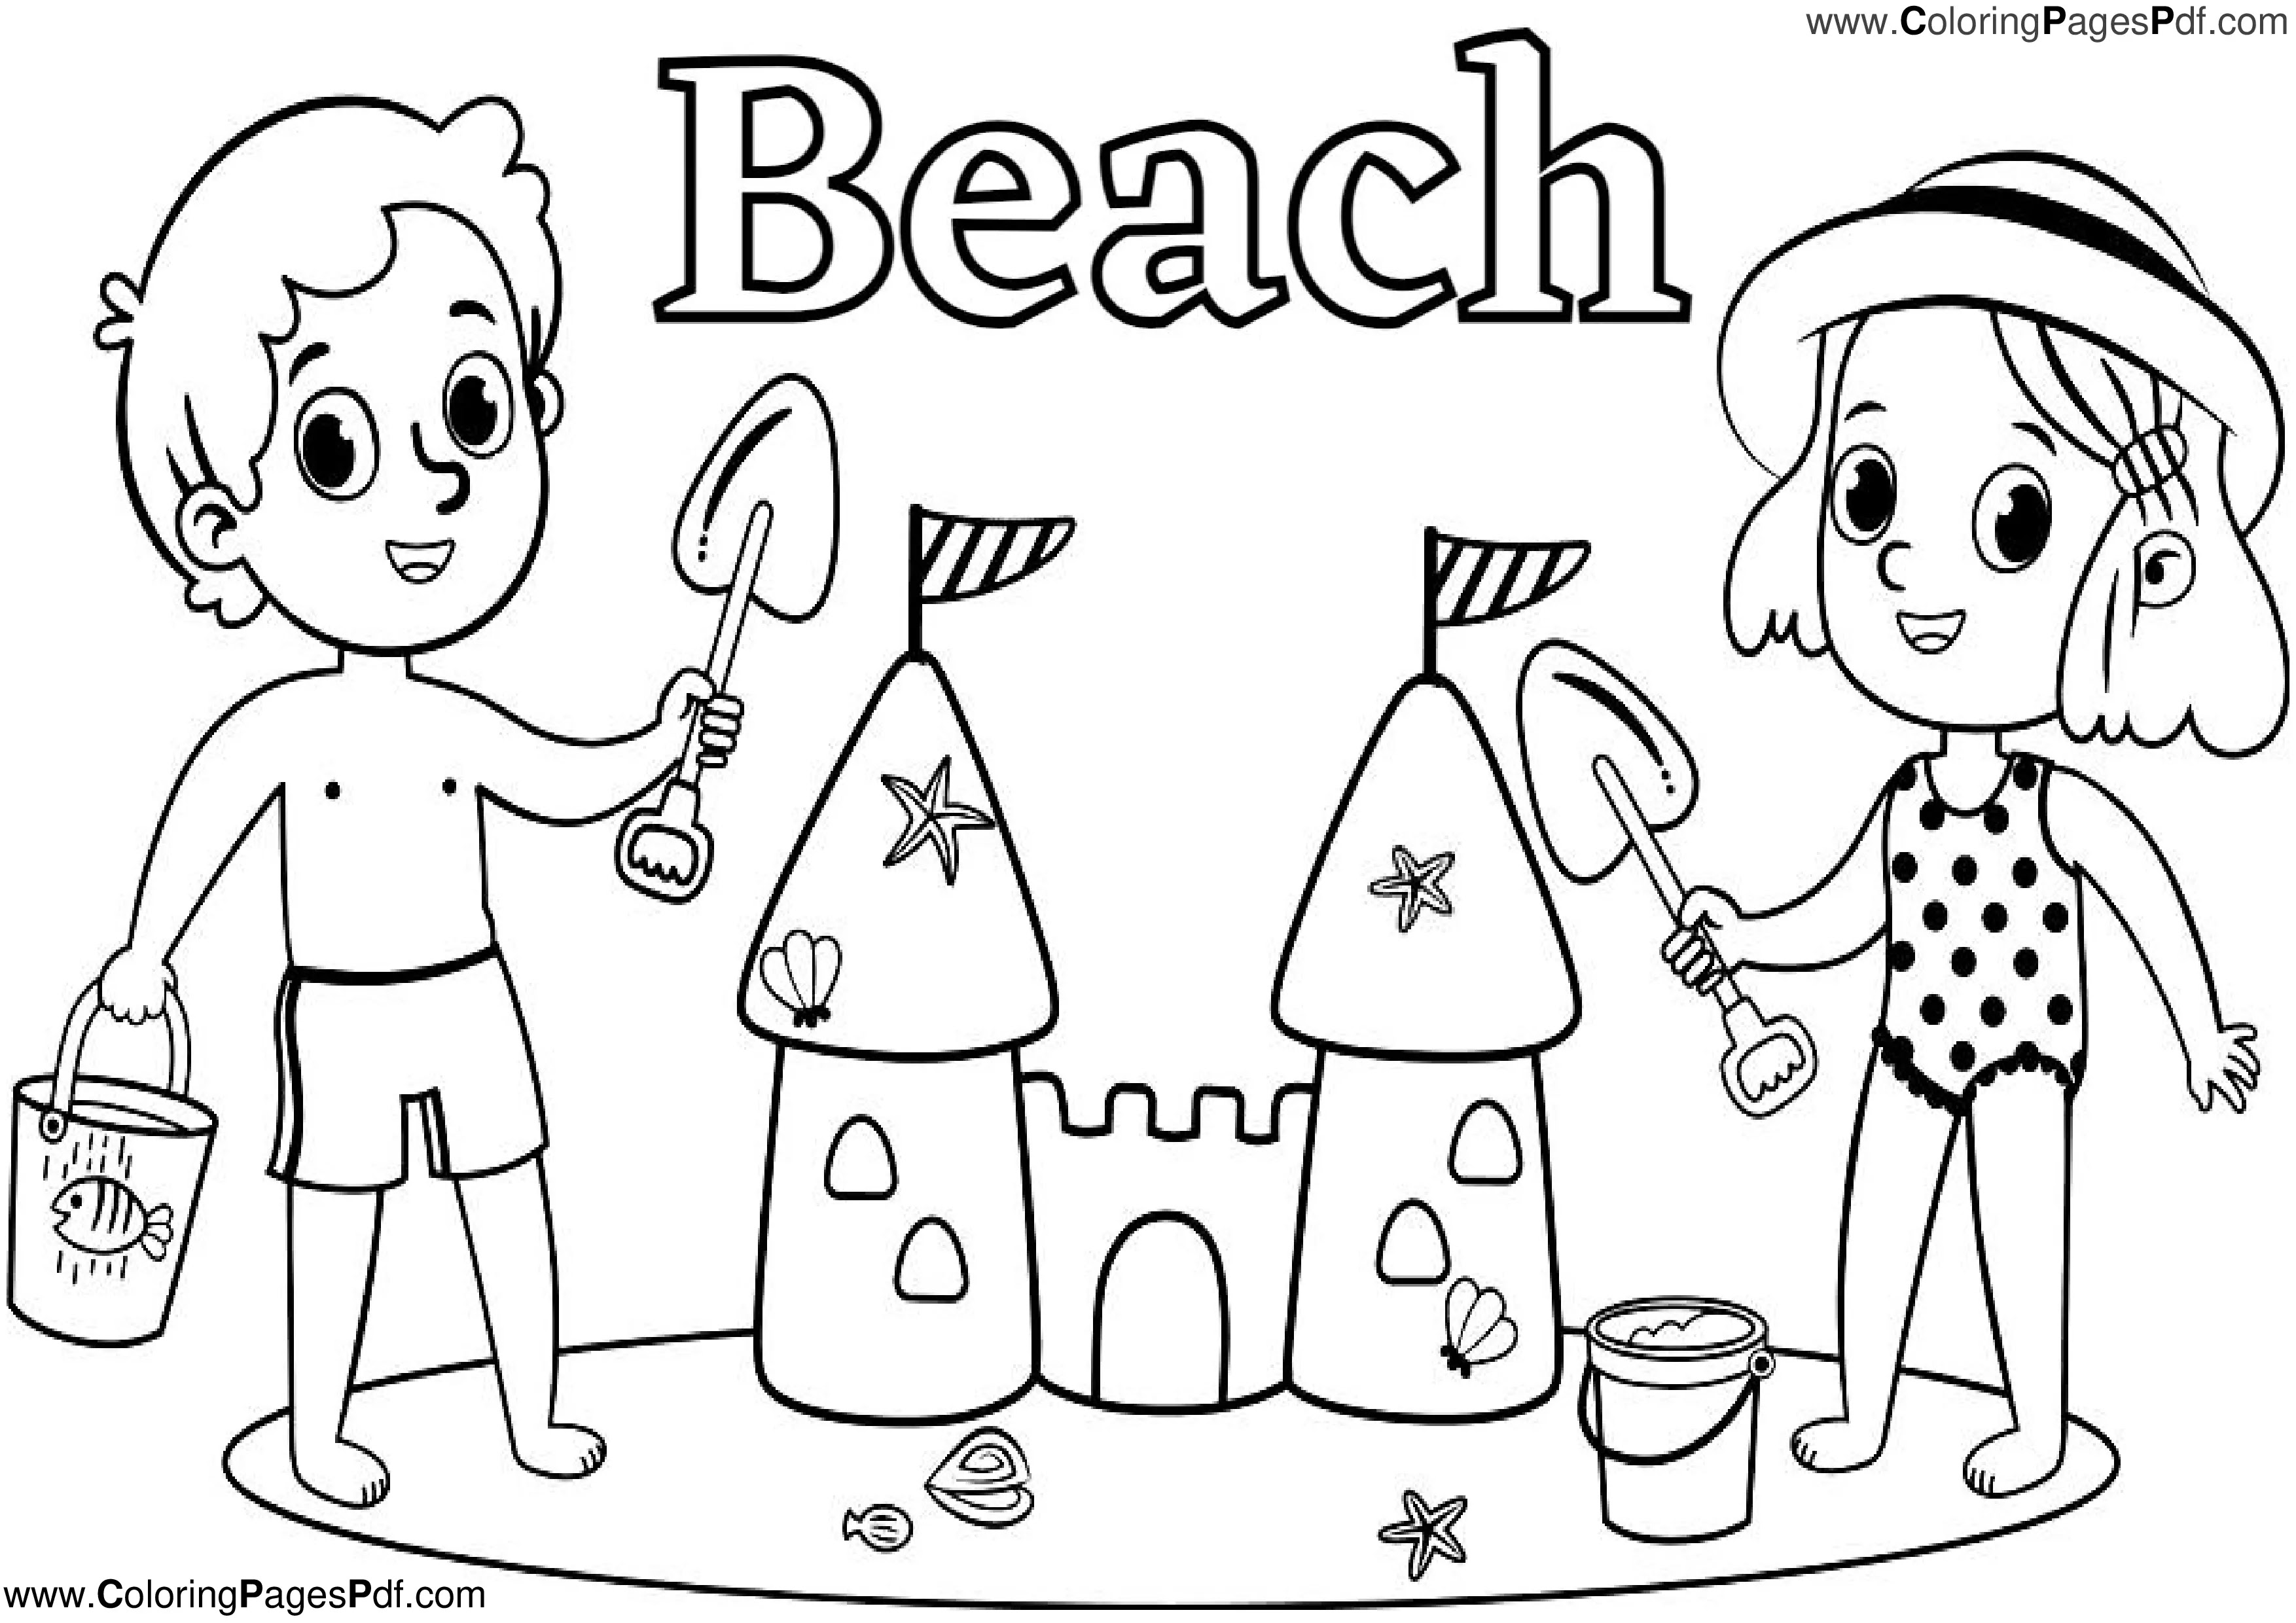 Beach coloring pages for kids